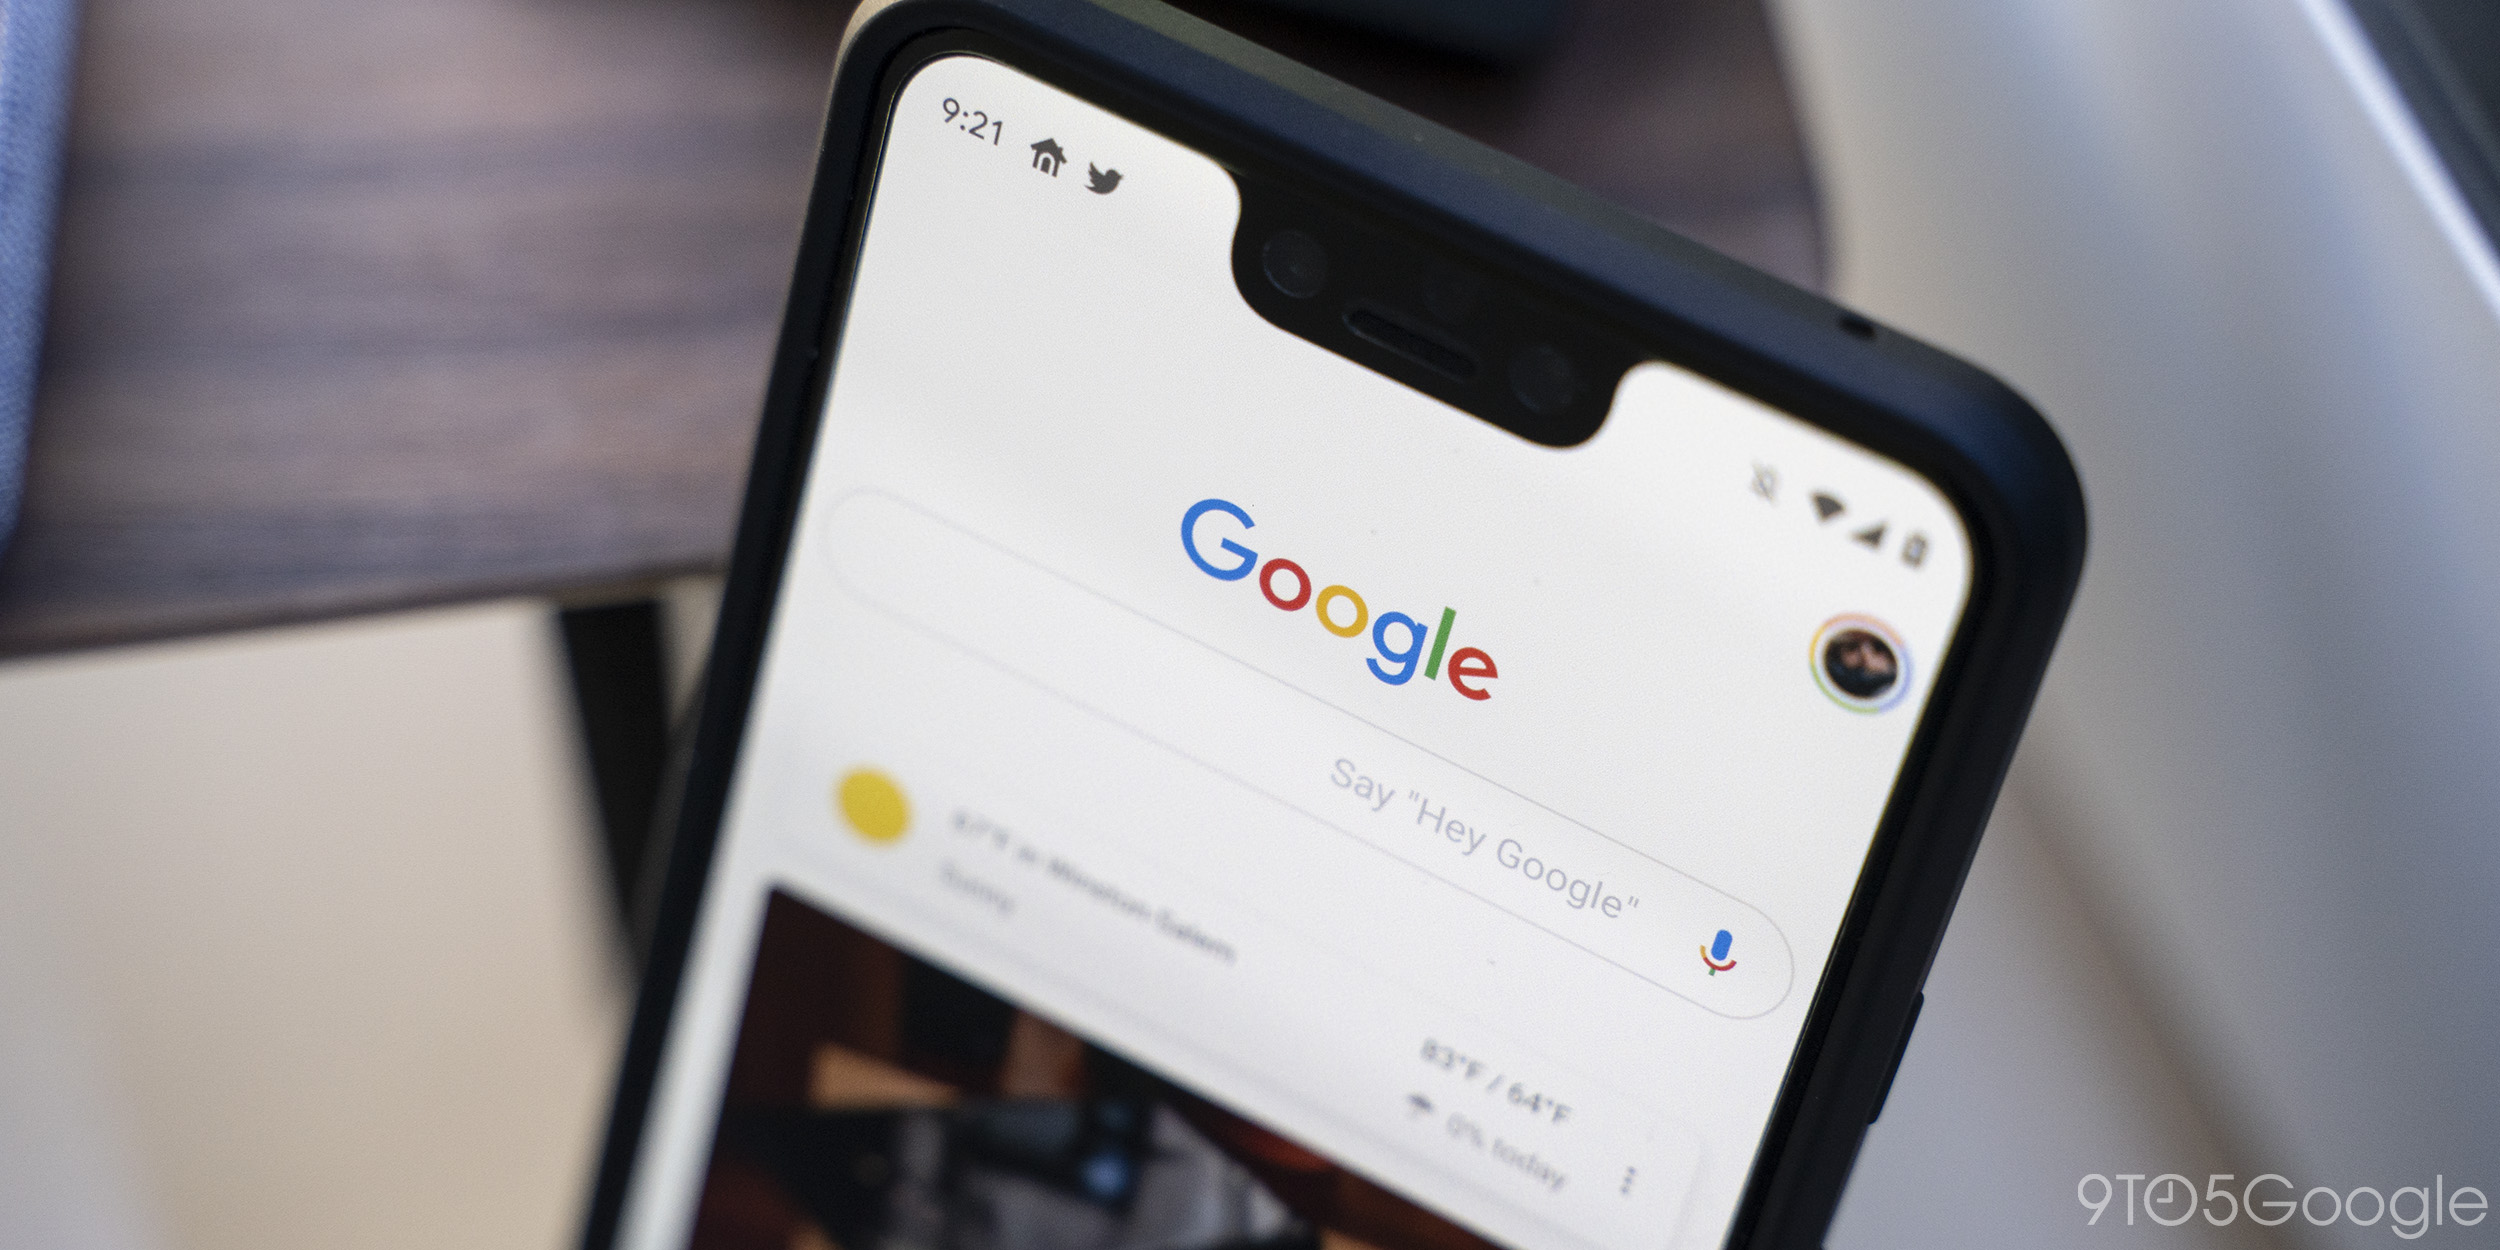 Google App Rolling Out Search Tools Filtering On Android 9to5google